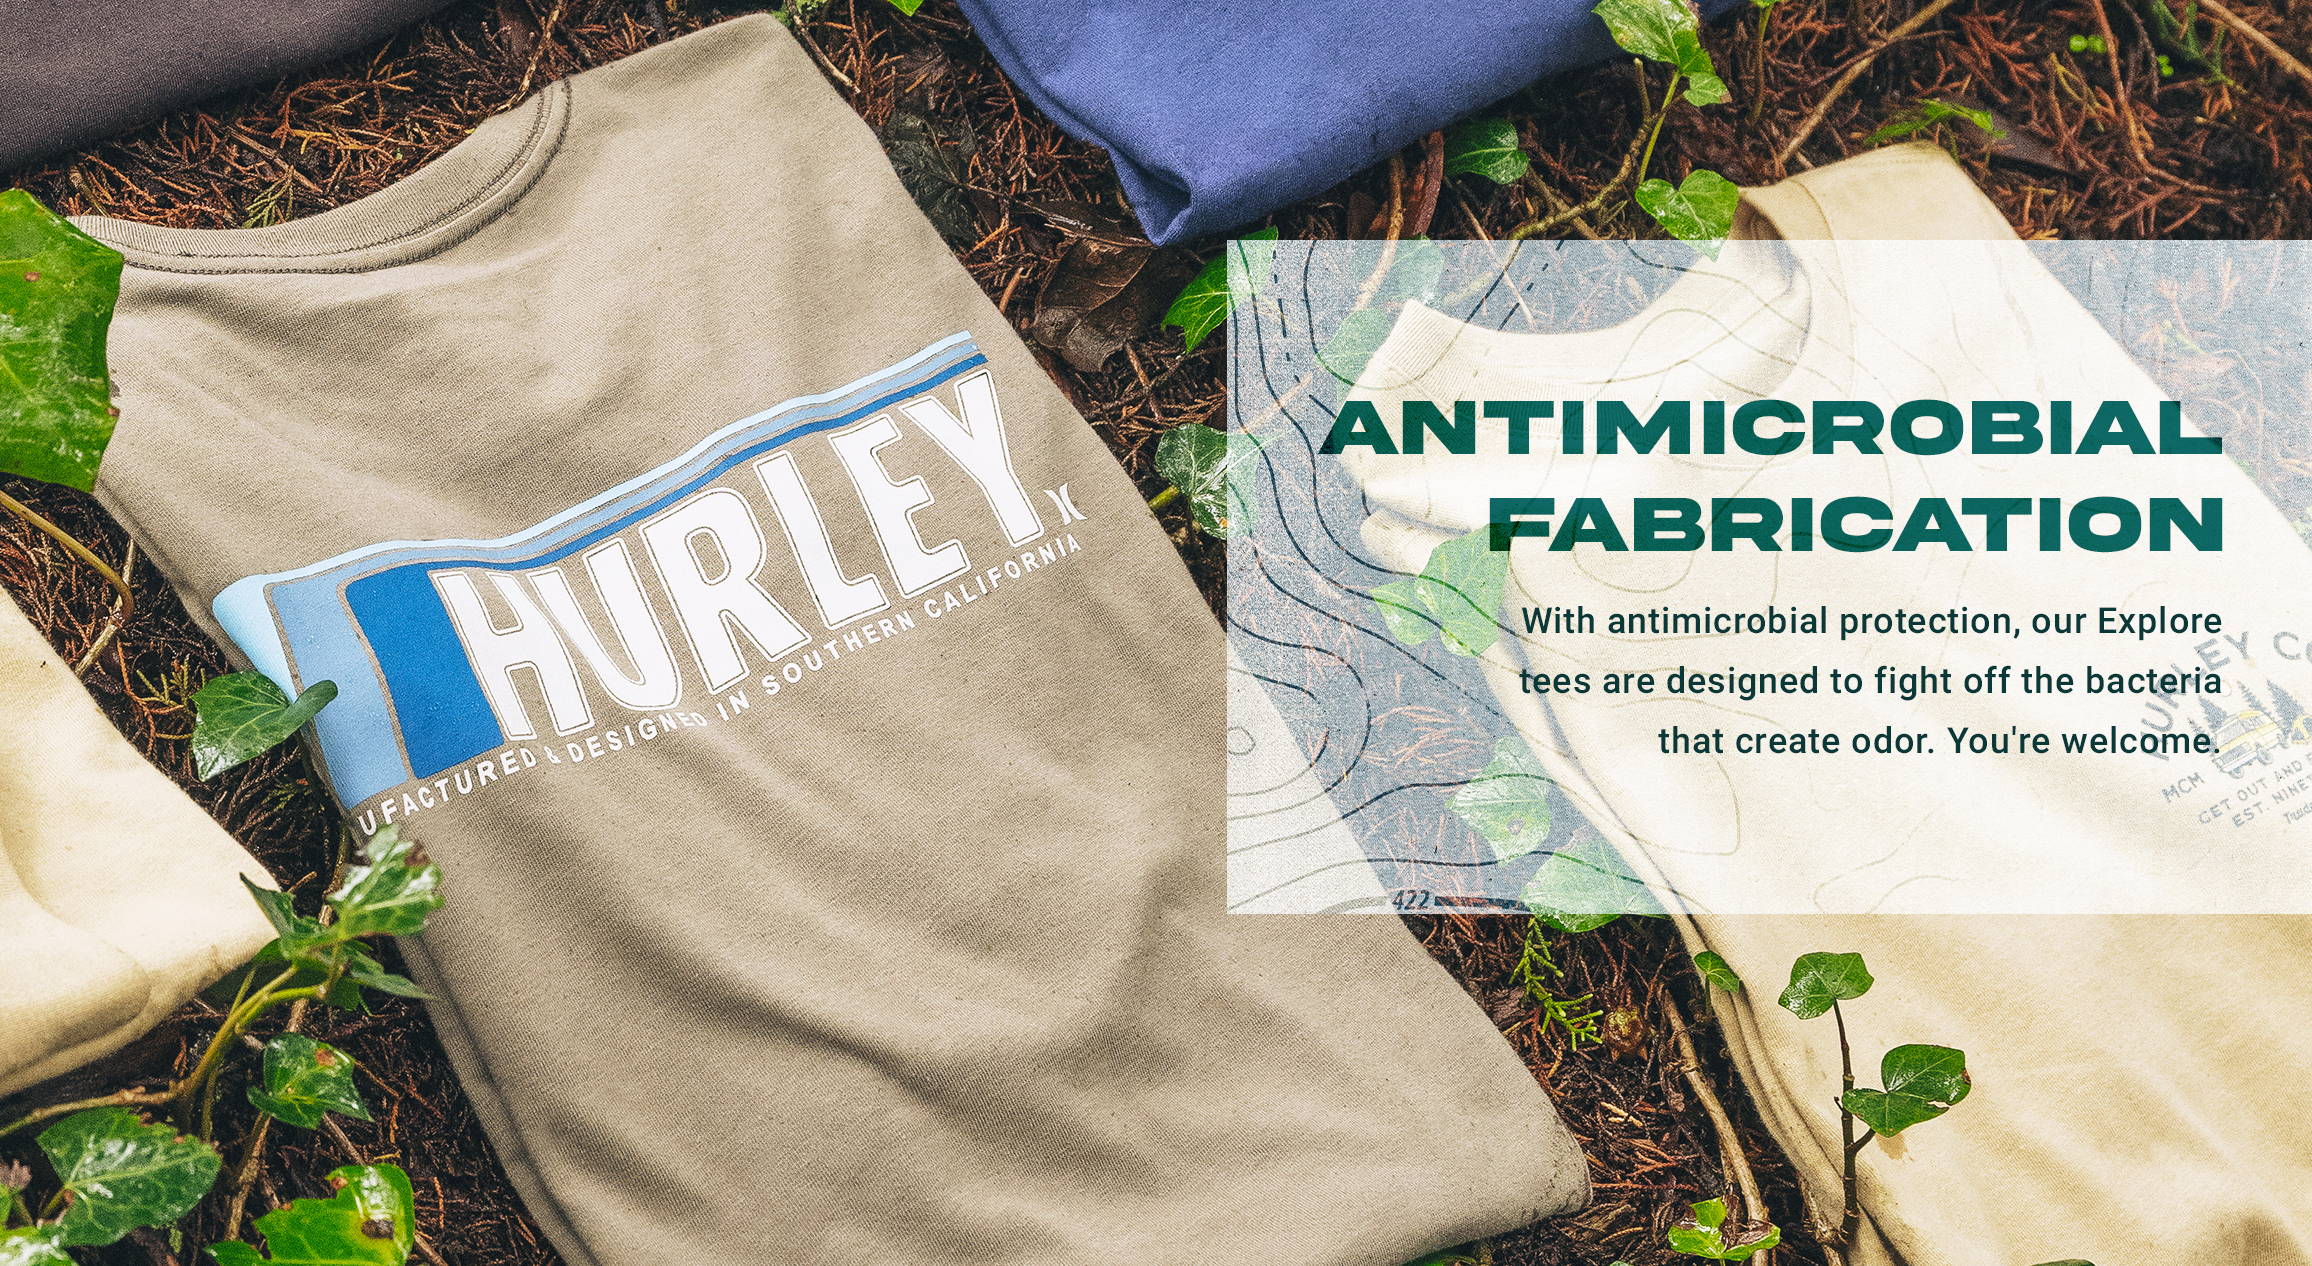 Hurley Explore Get Out There. Antimicrobial Fabrication.